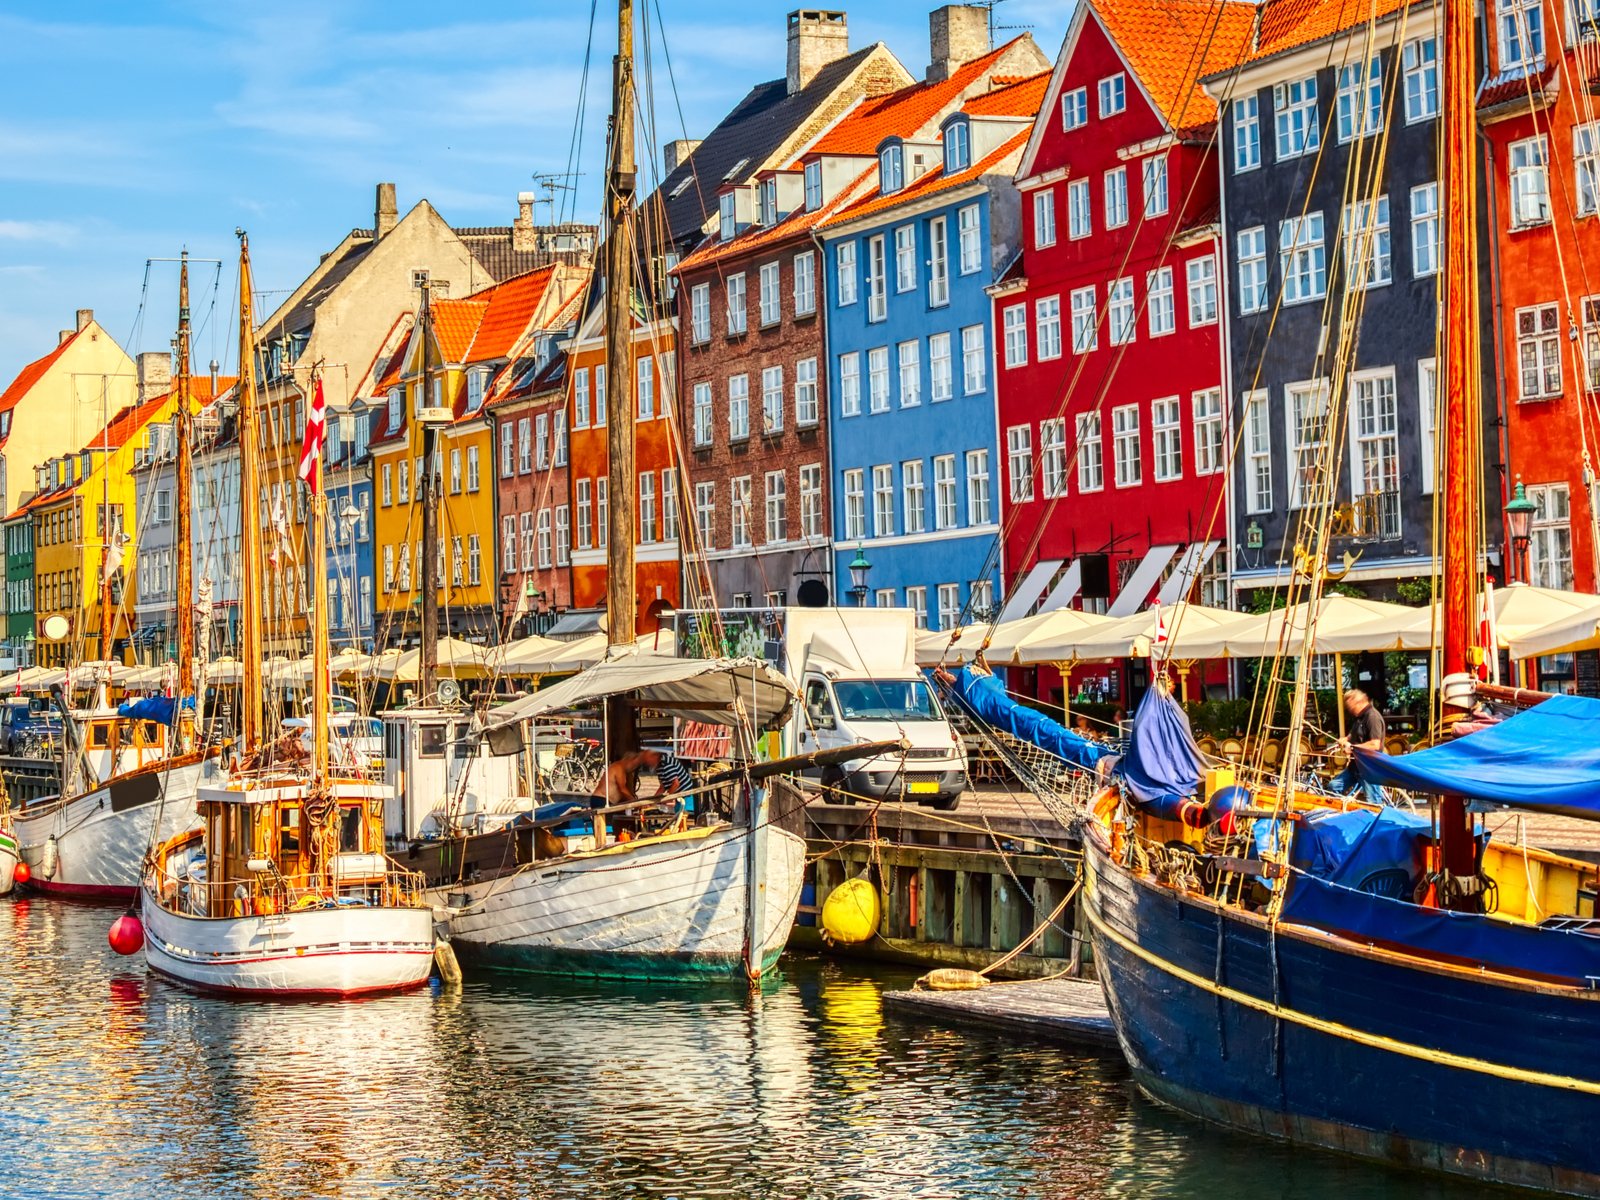 Copenhagen is an alluring mix of continental flair and Nordic cool.